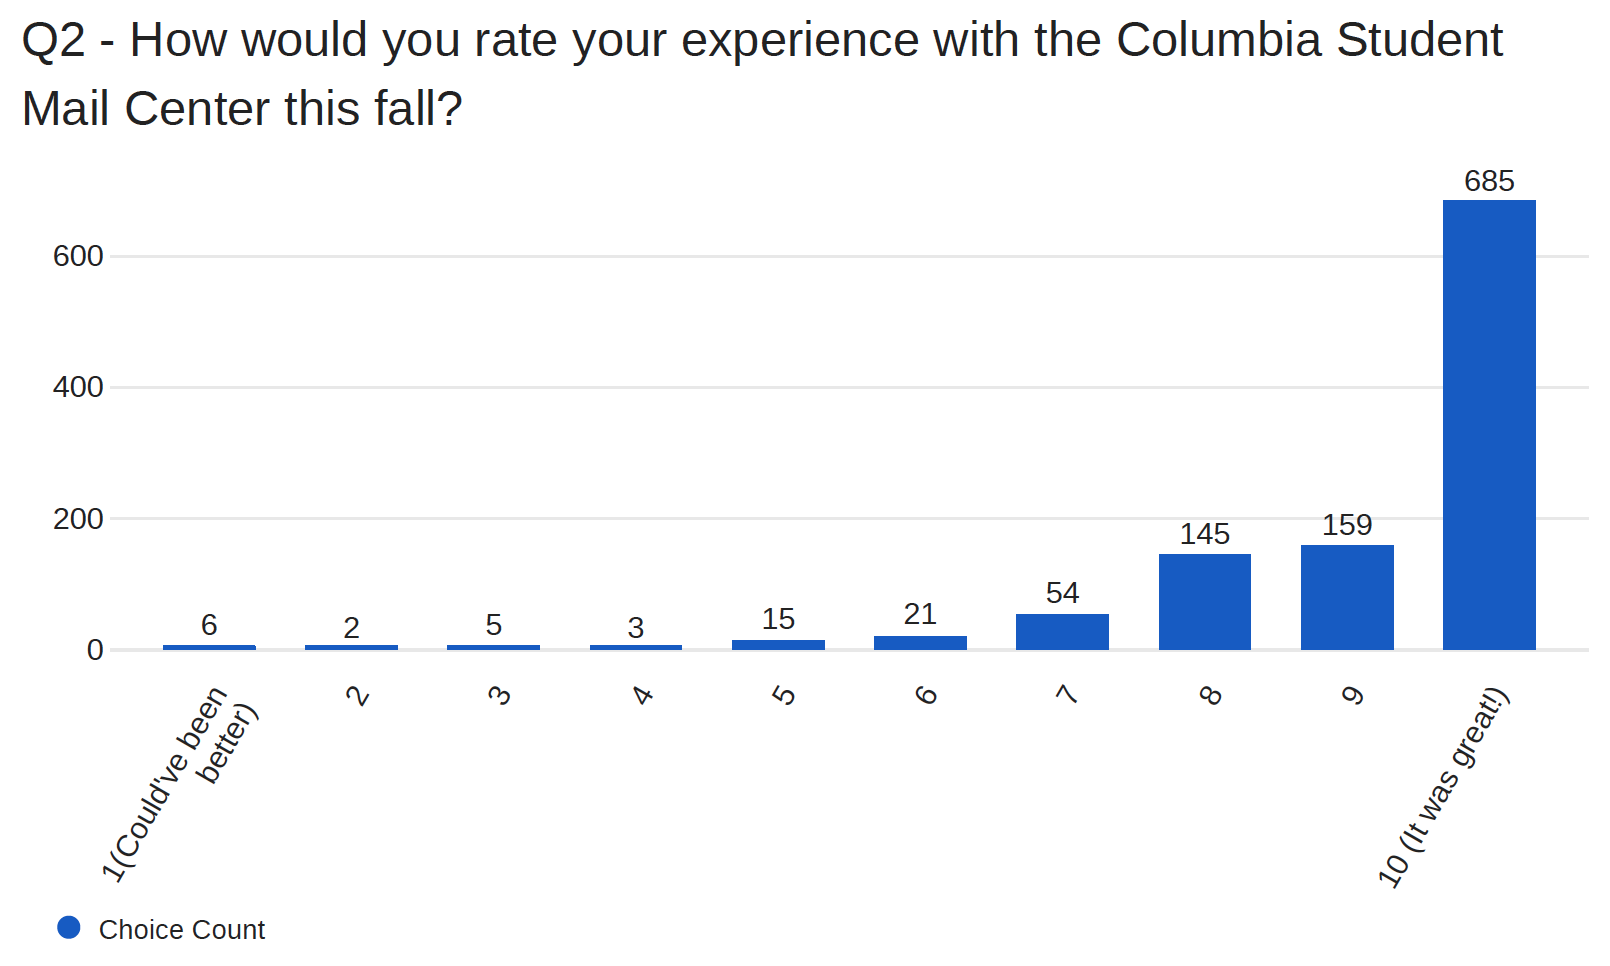 How would you rate your experience with the Columbia Student Mail Center this fall?